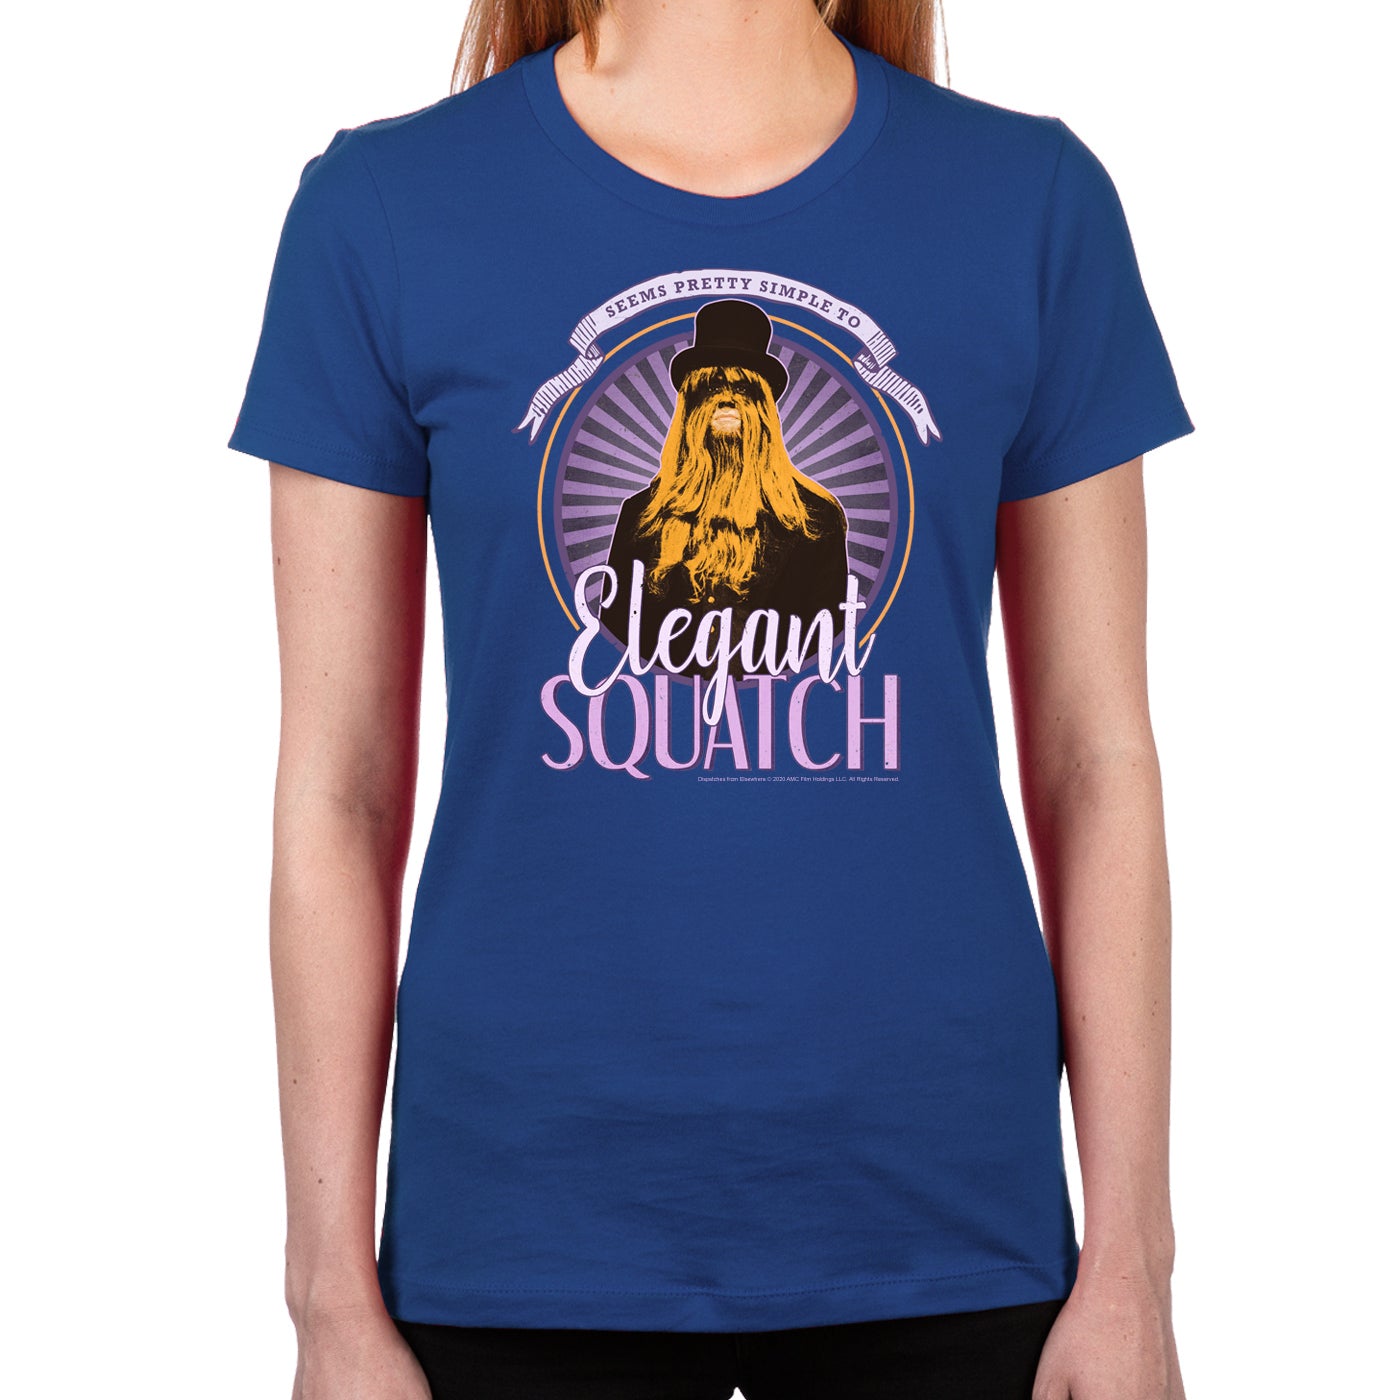 Dispatches From Elsewhere Elegant Squatch Women's T-Shirt